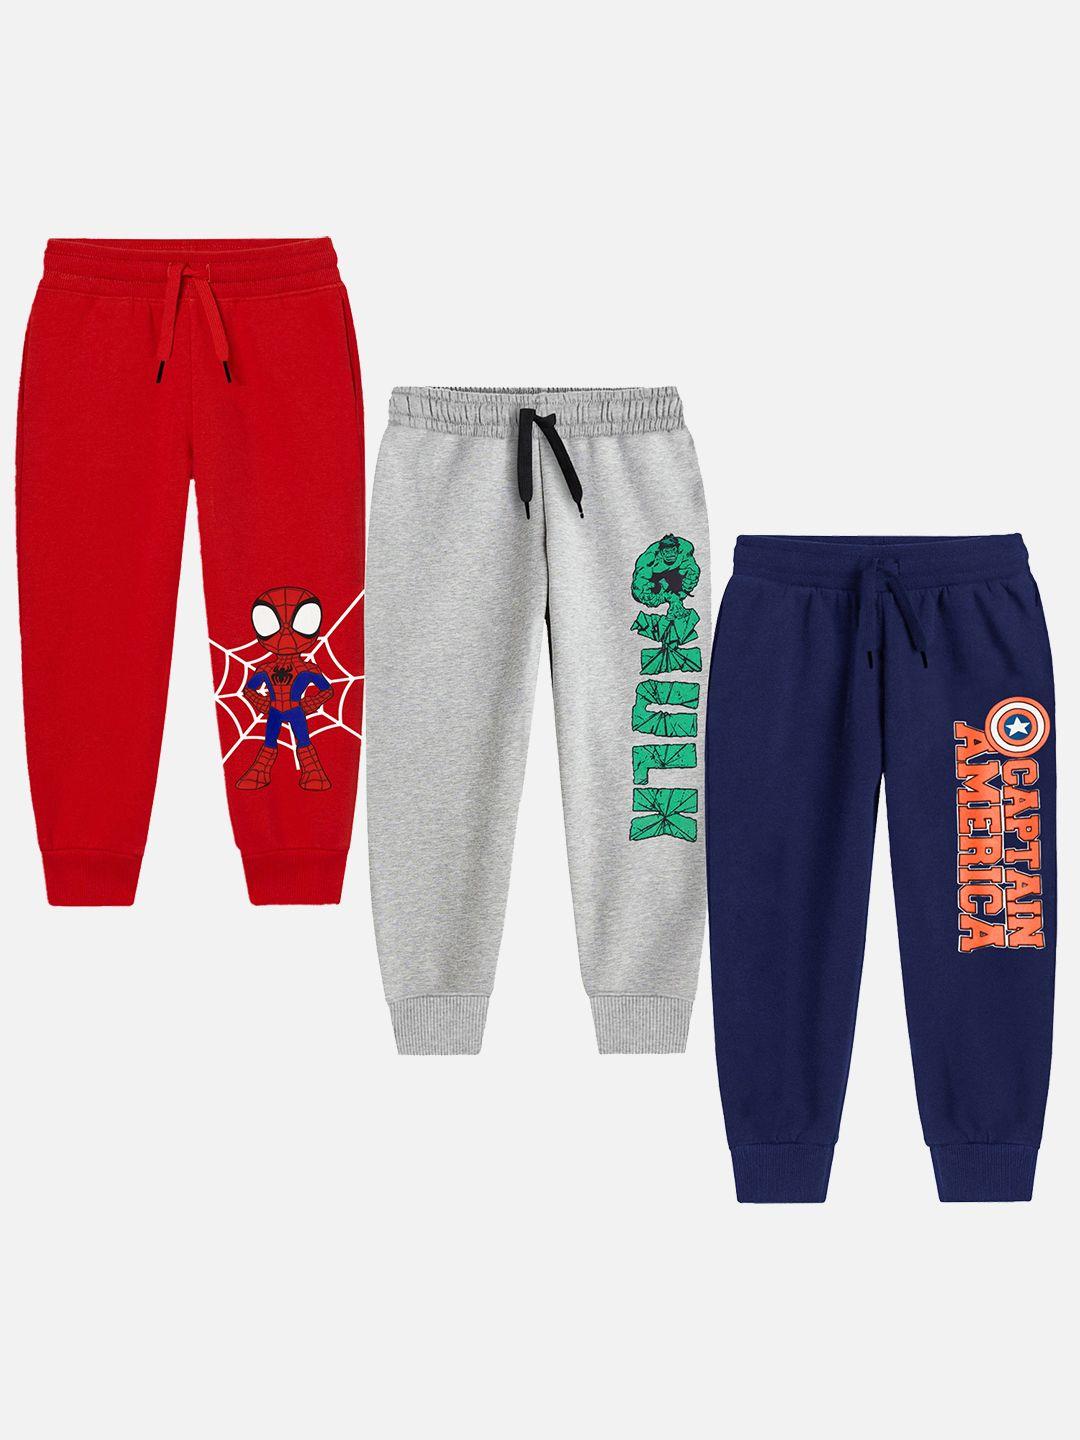 yk marvel boys pack of 3 red,blue & grey printed joggers